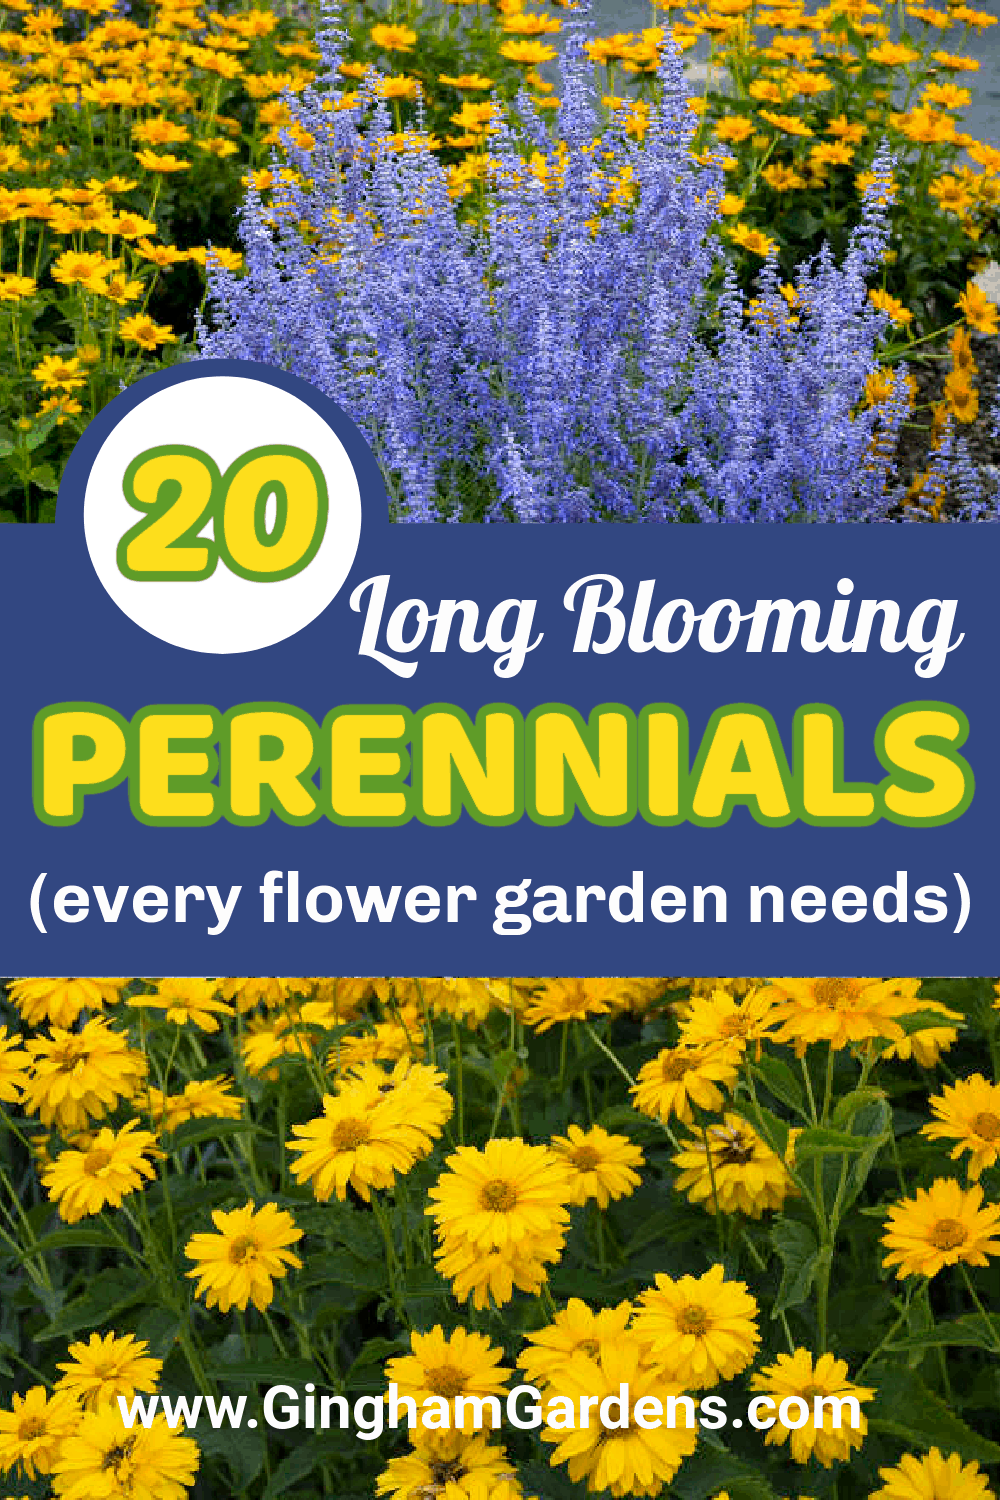 Image of Flowers with text overlay - 20 Classic Perennials